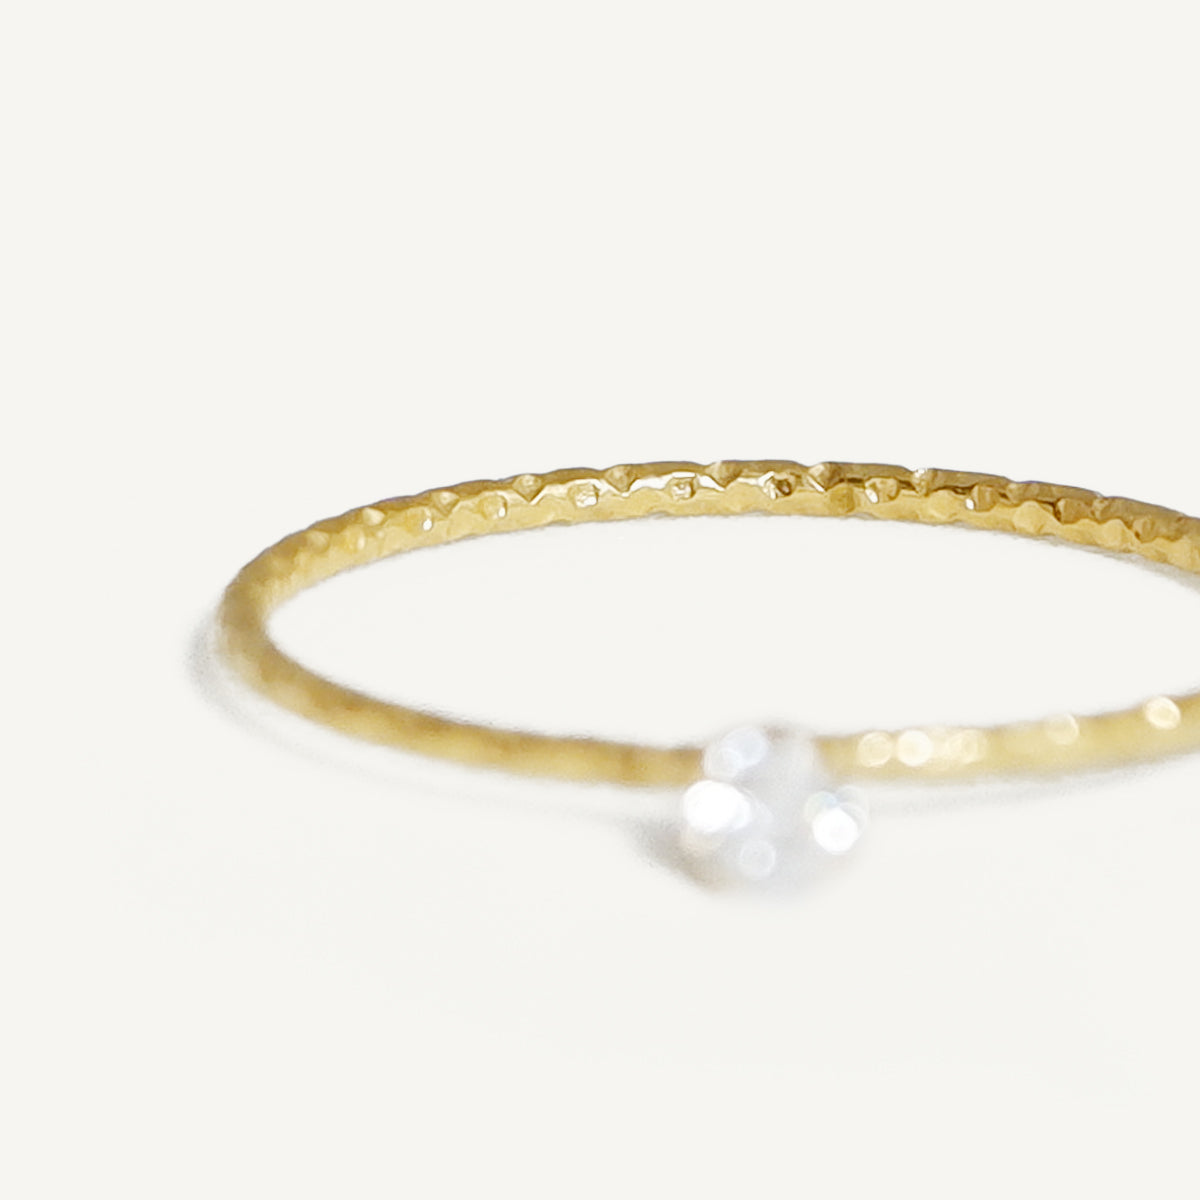 The Skinny Textured Solitaire Ring